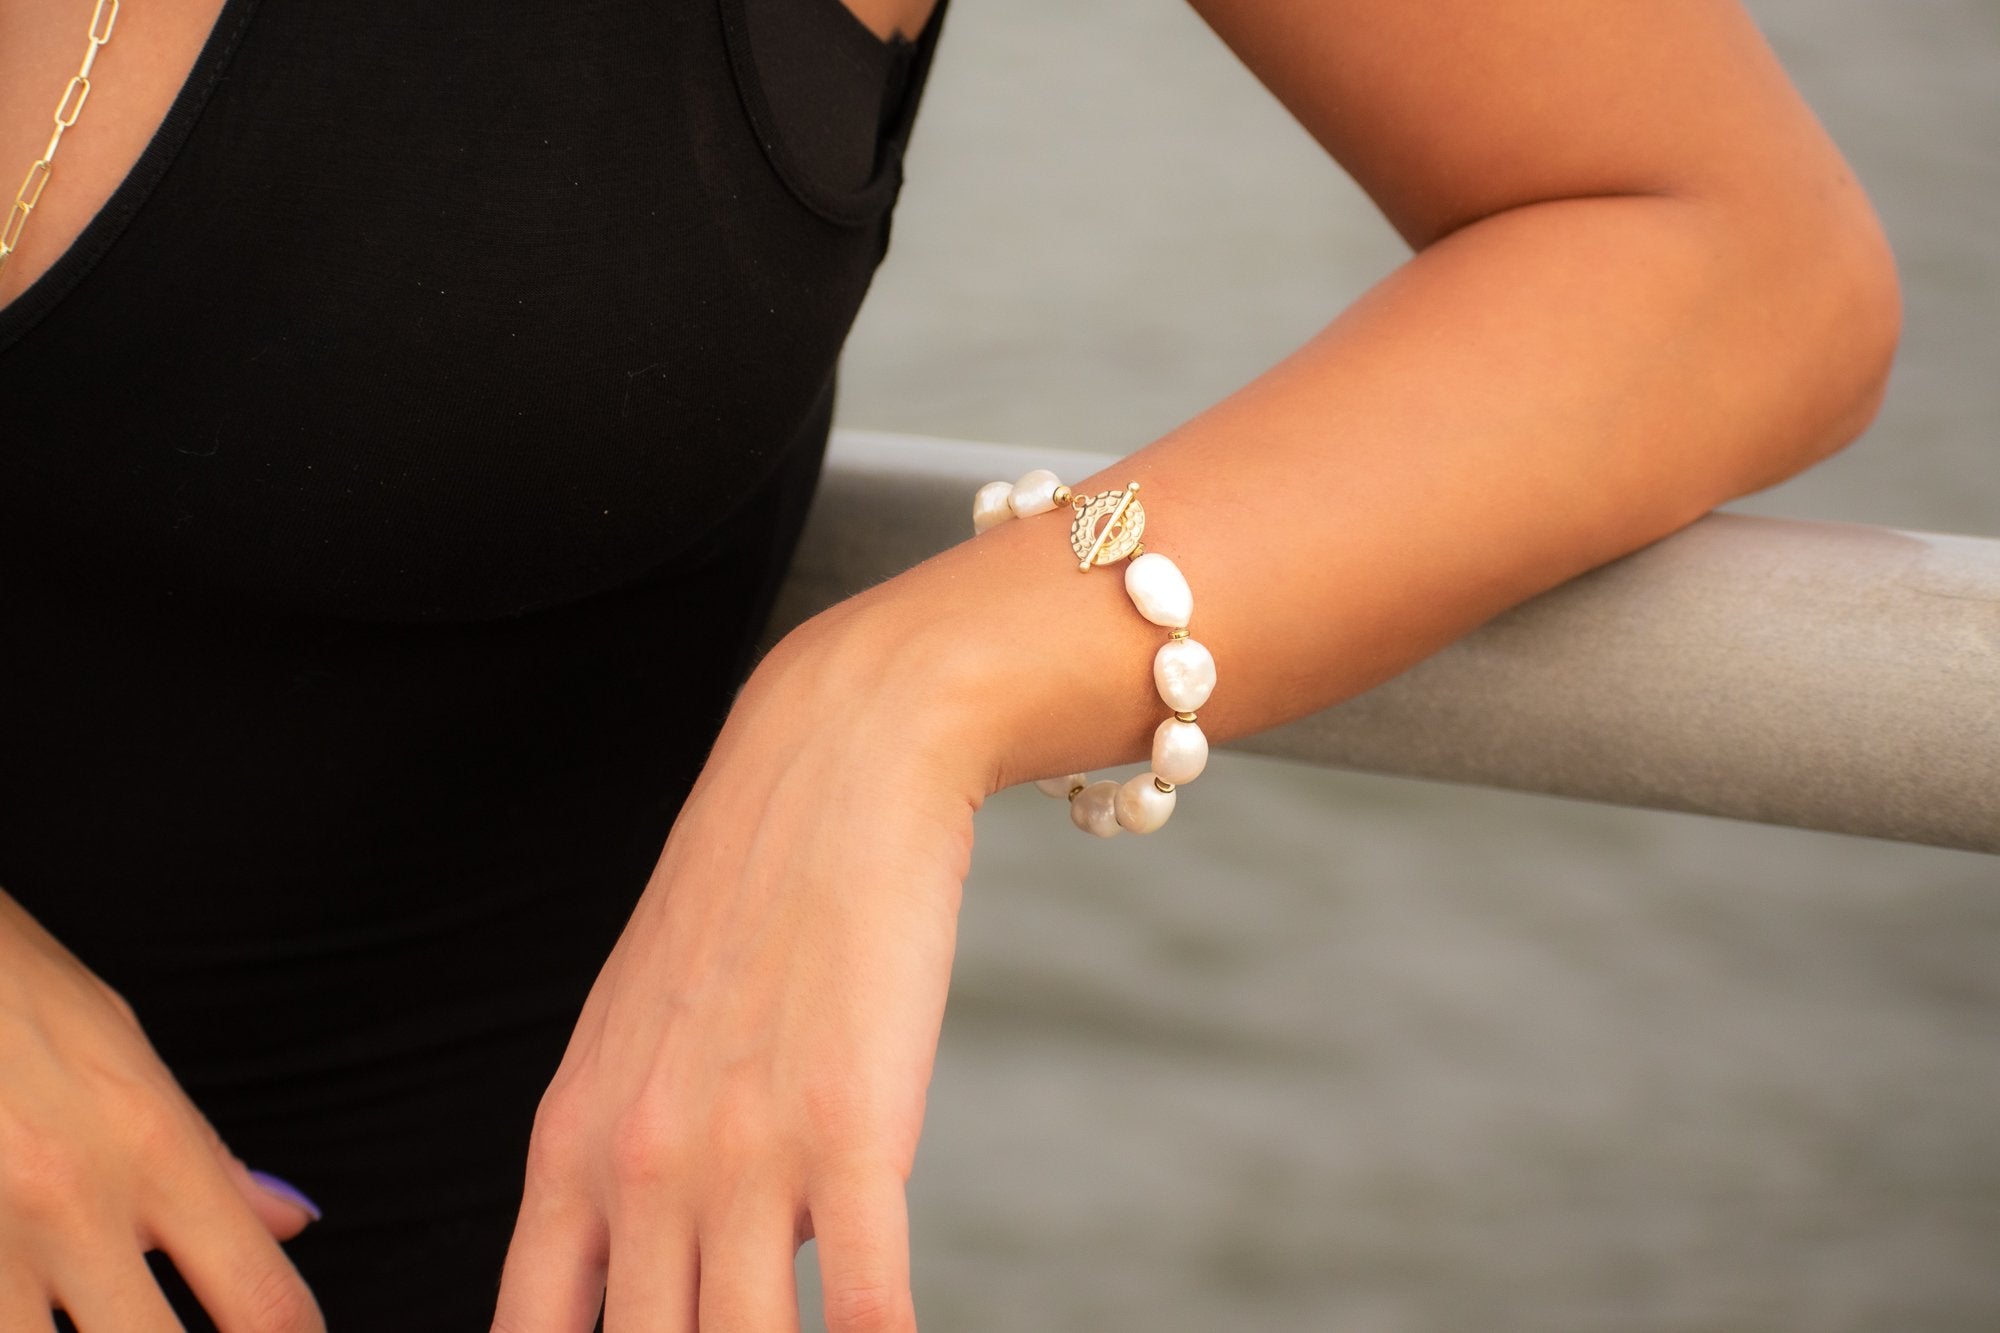 Style Guide 6 Unique Ways to Wear a Pearl Bracelet  PearlsOnly   PearlsOnly  Save up to 80 with Pearls Only